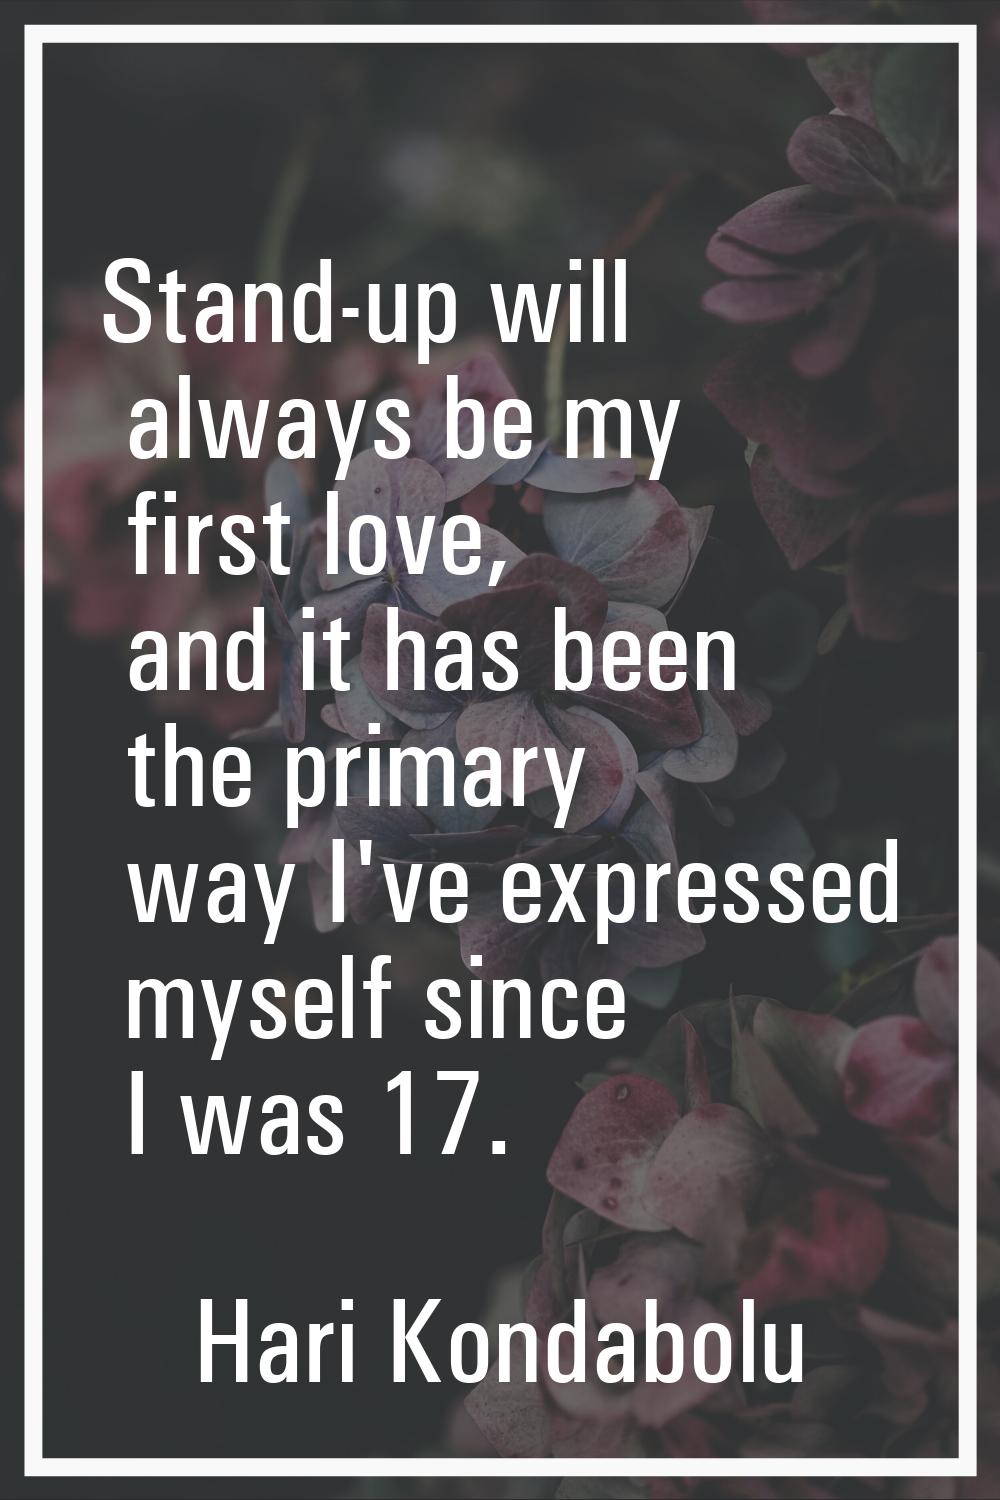 Stand-up will always be my first love, and it has been the primary way I've expressed myself since 